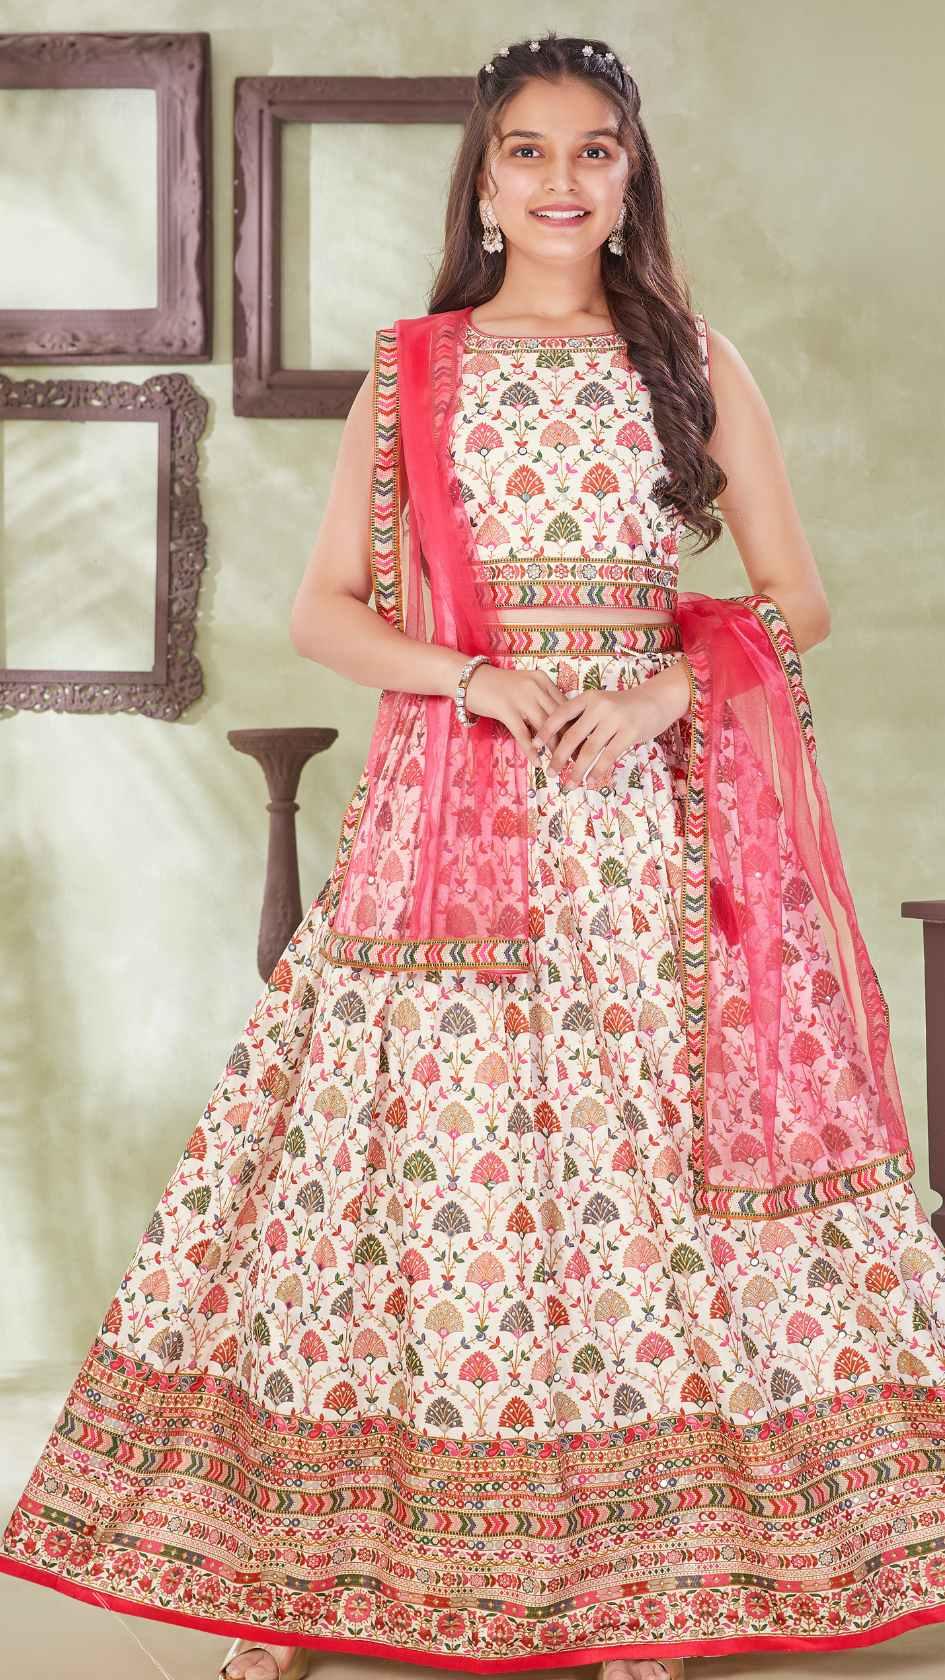 Buy Celebrations Special Pink & Cream Lehenga Saree from Aaha Enna Porutham  (806-G) Online at Best Price in India on Naaptol.com